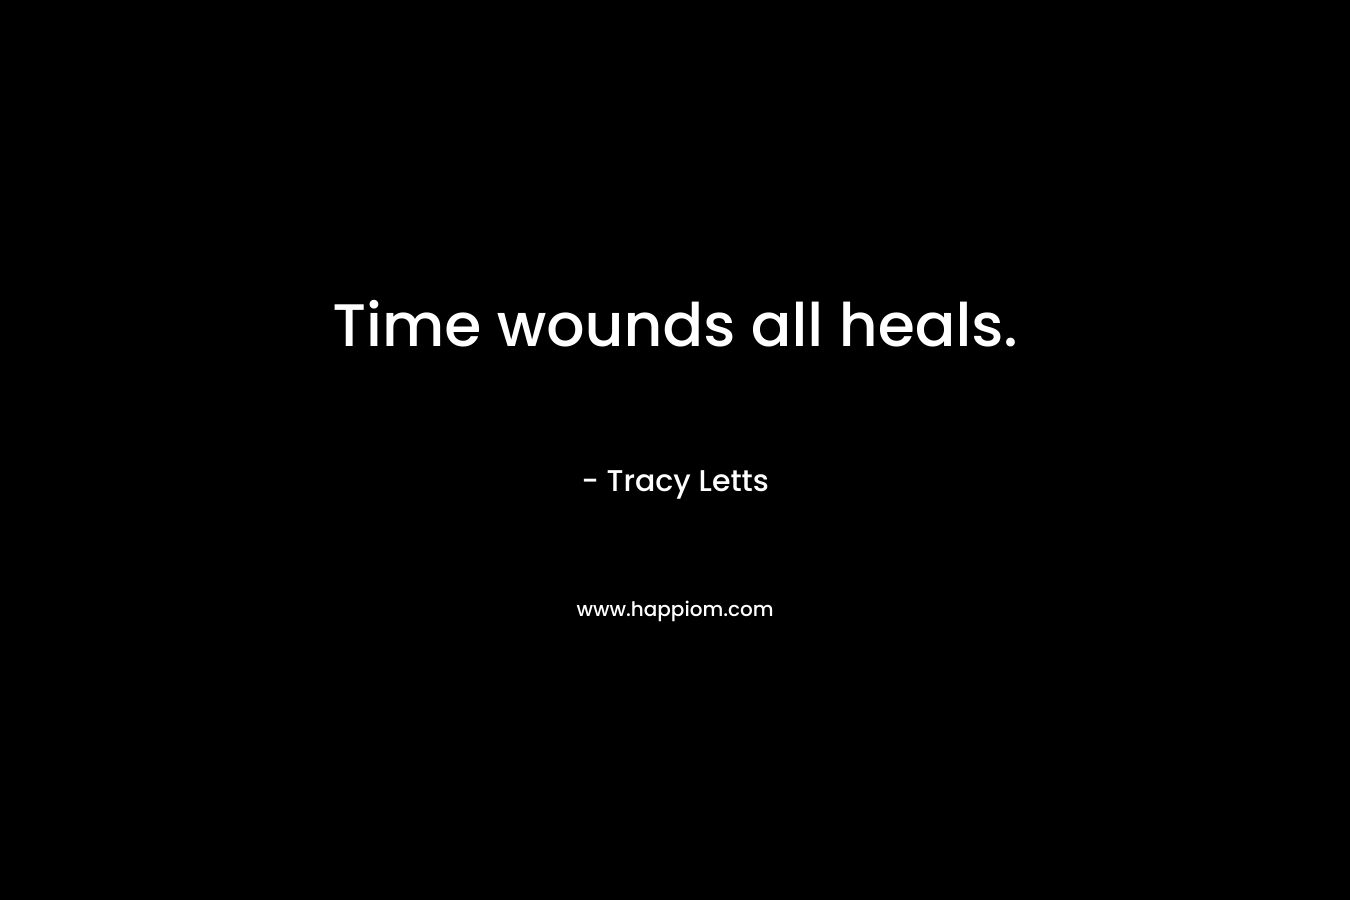 Time wounds all heals. – Tracy Letts